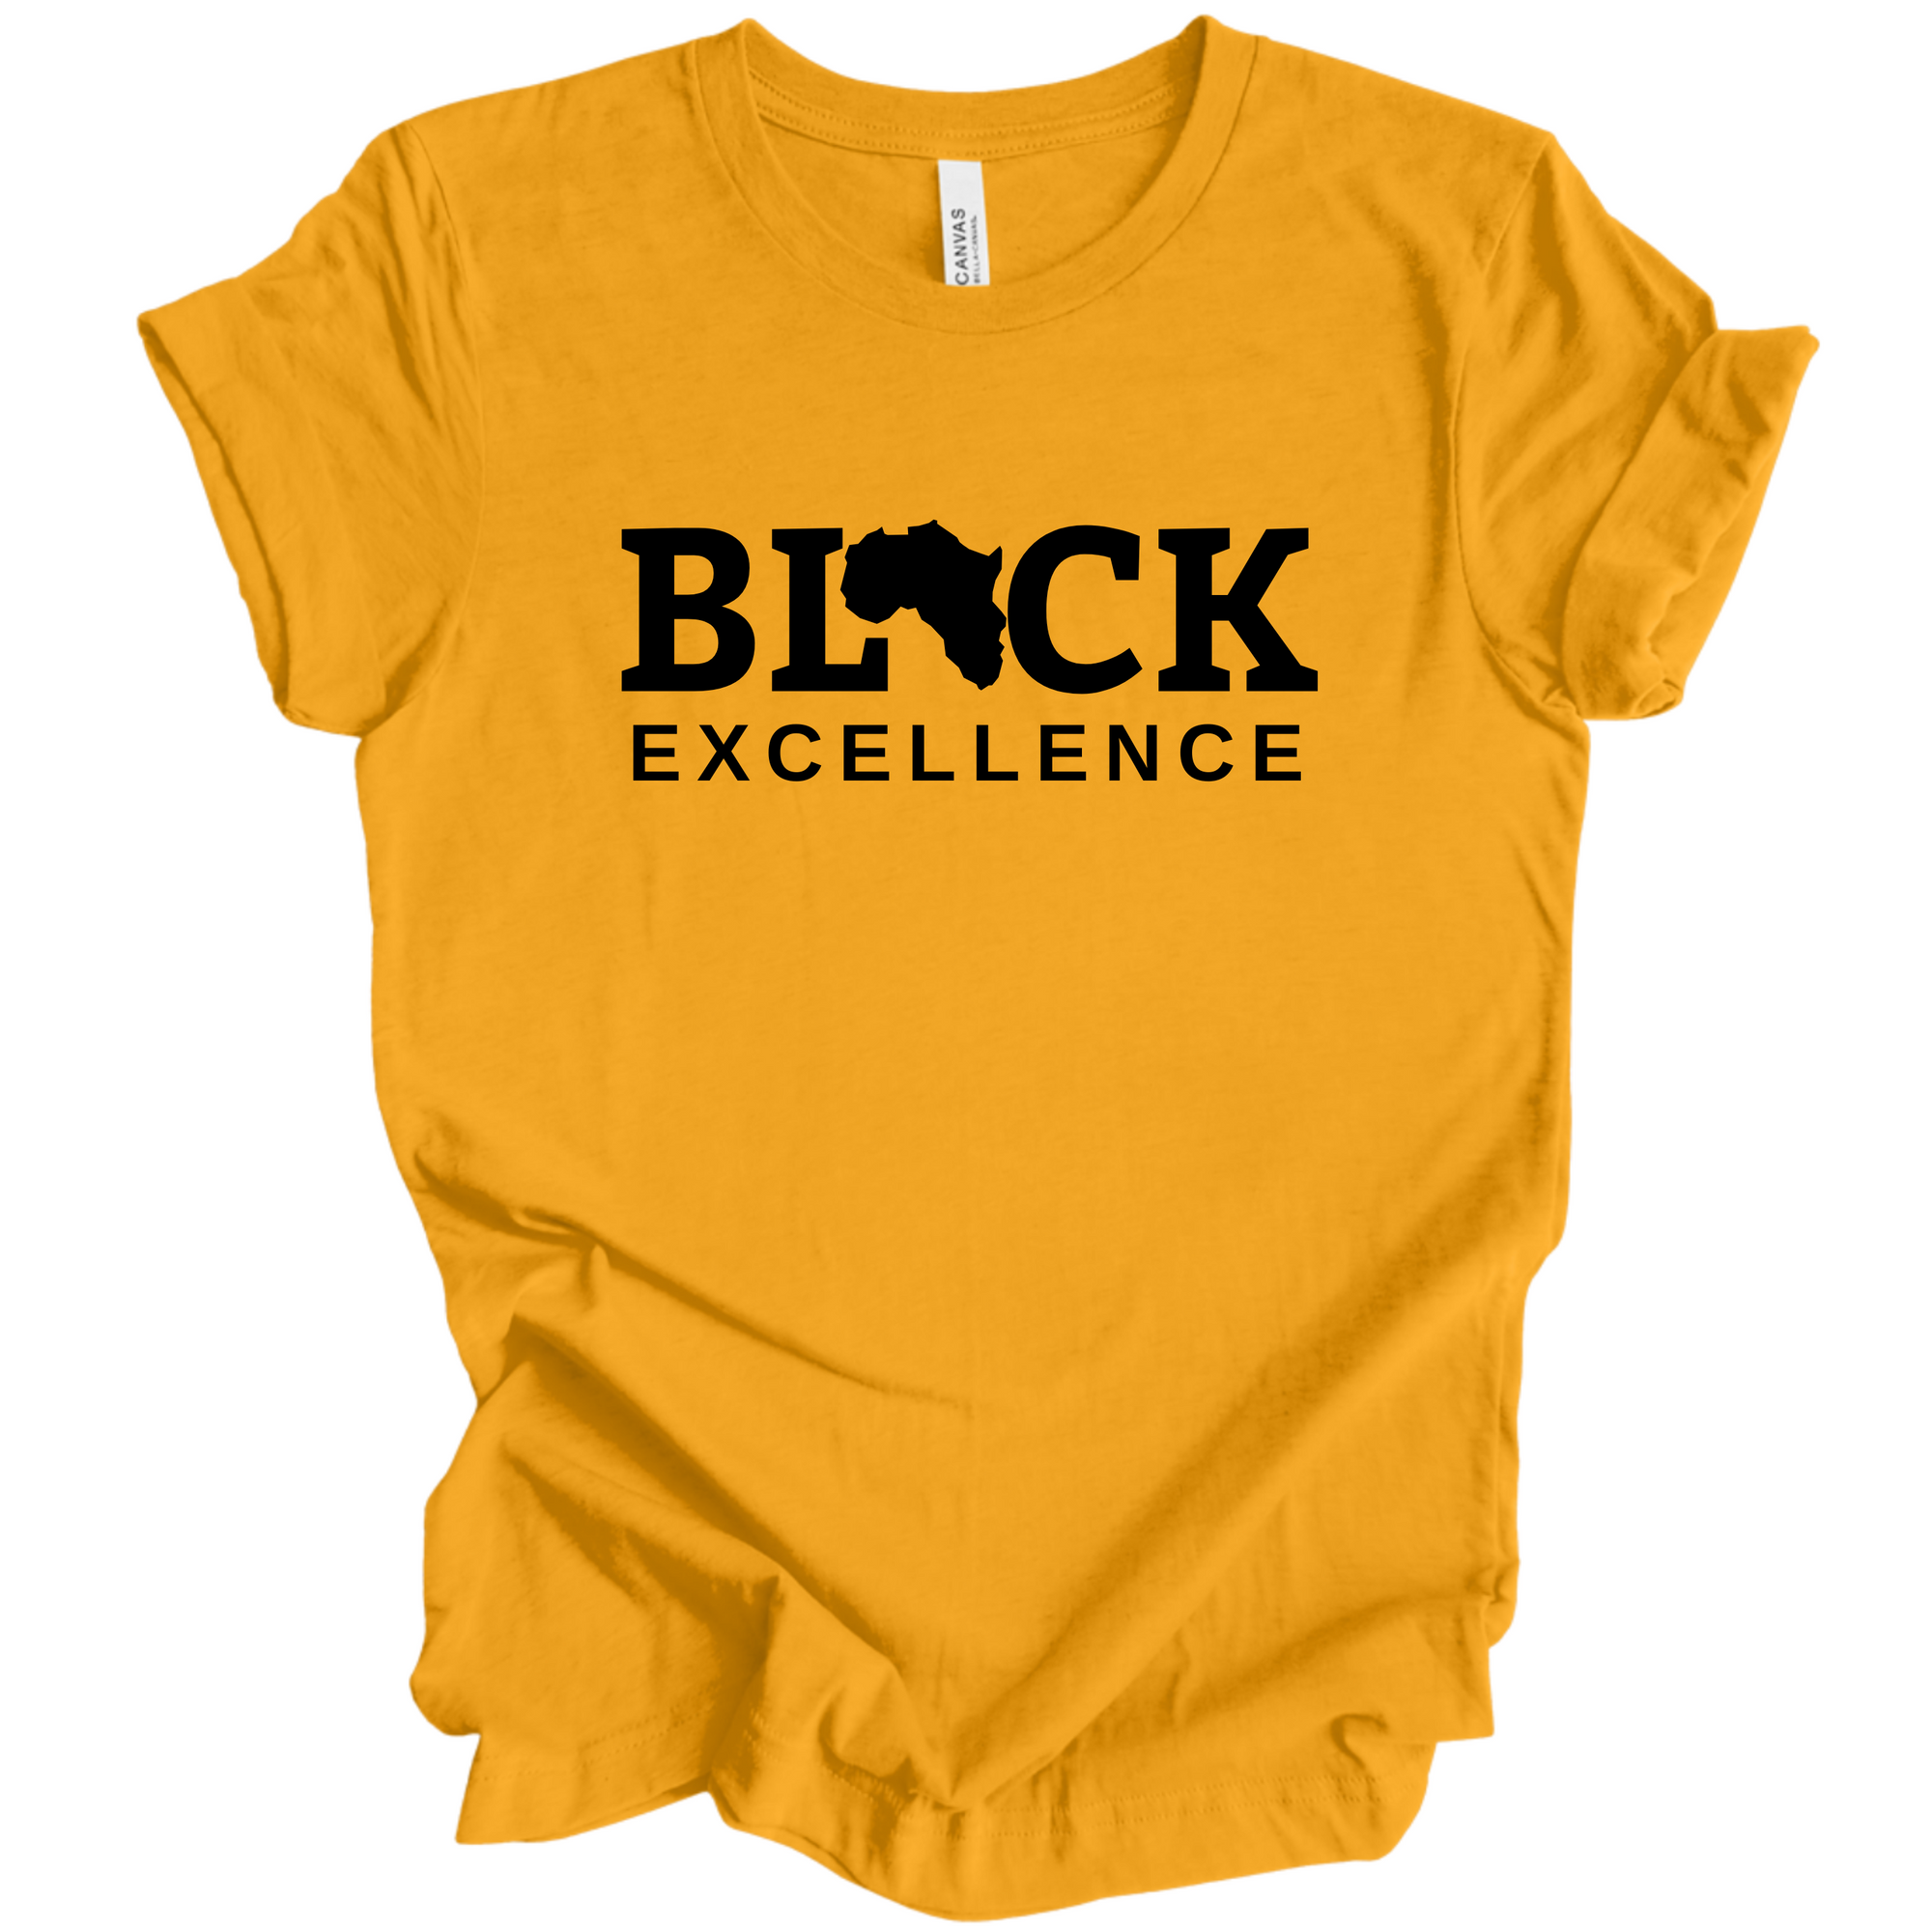 Black Excellence - Tee